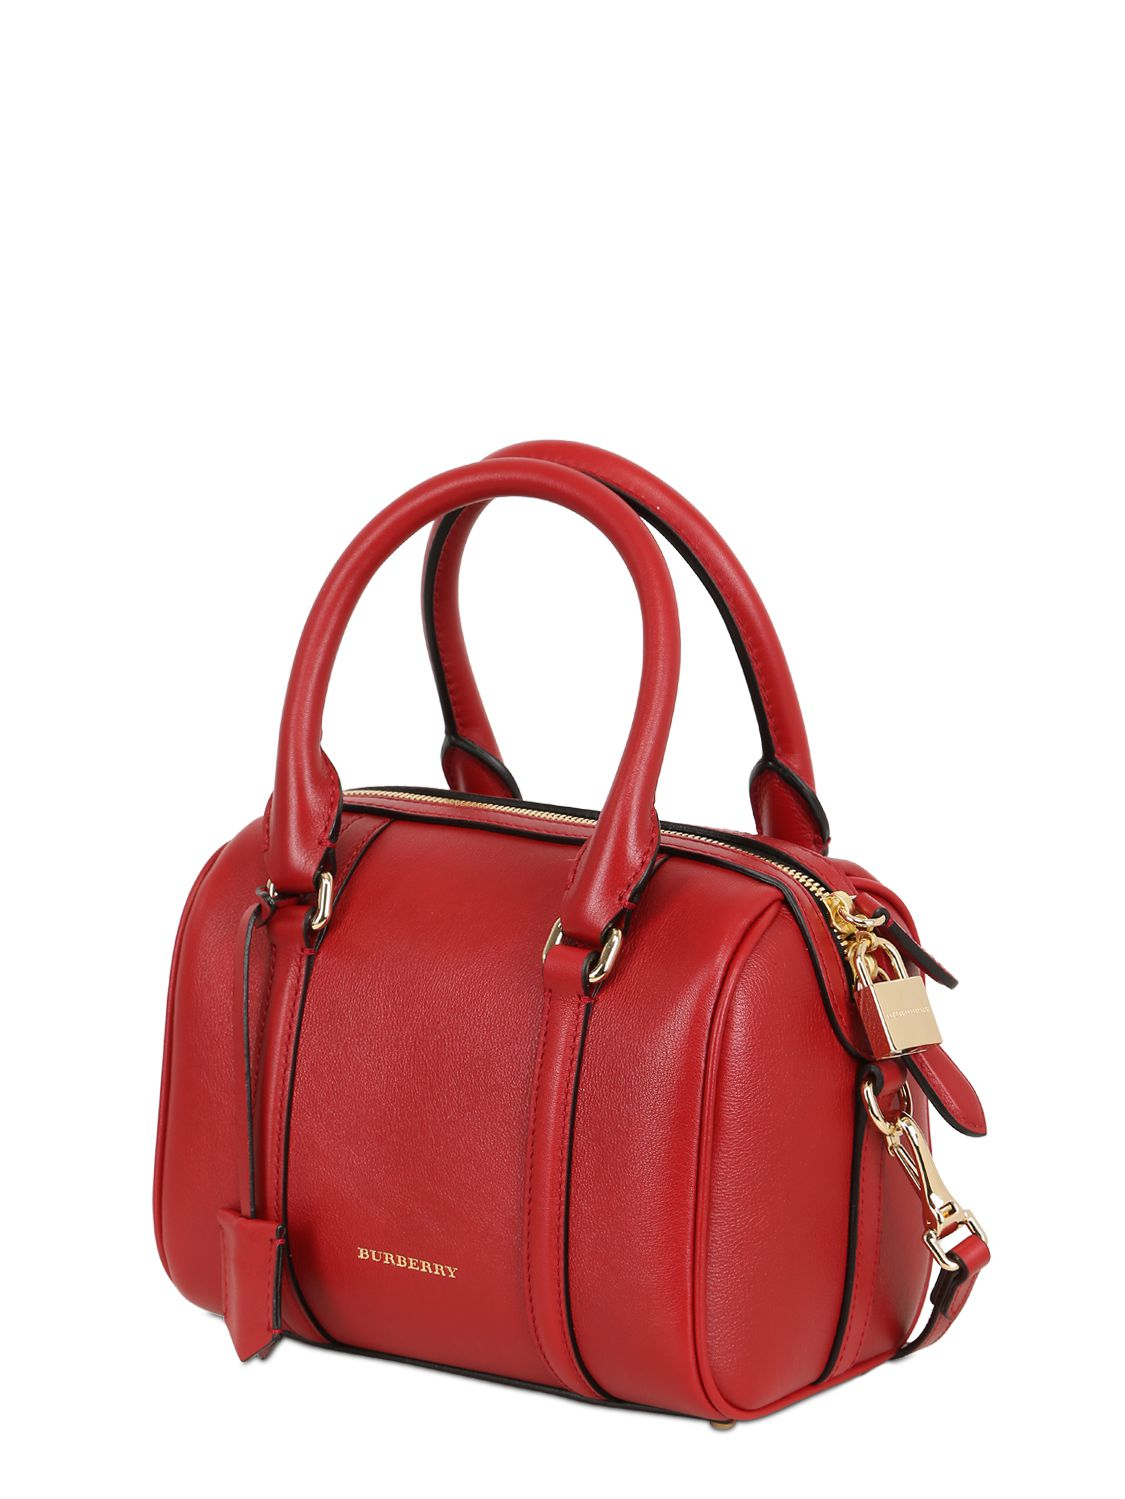 Lyst - Burberry Small Alchstrarm Leather Top Handle Bag in Red